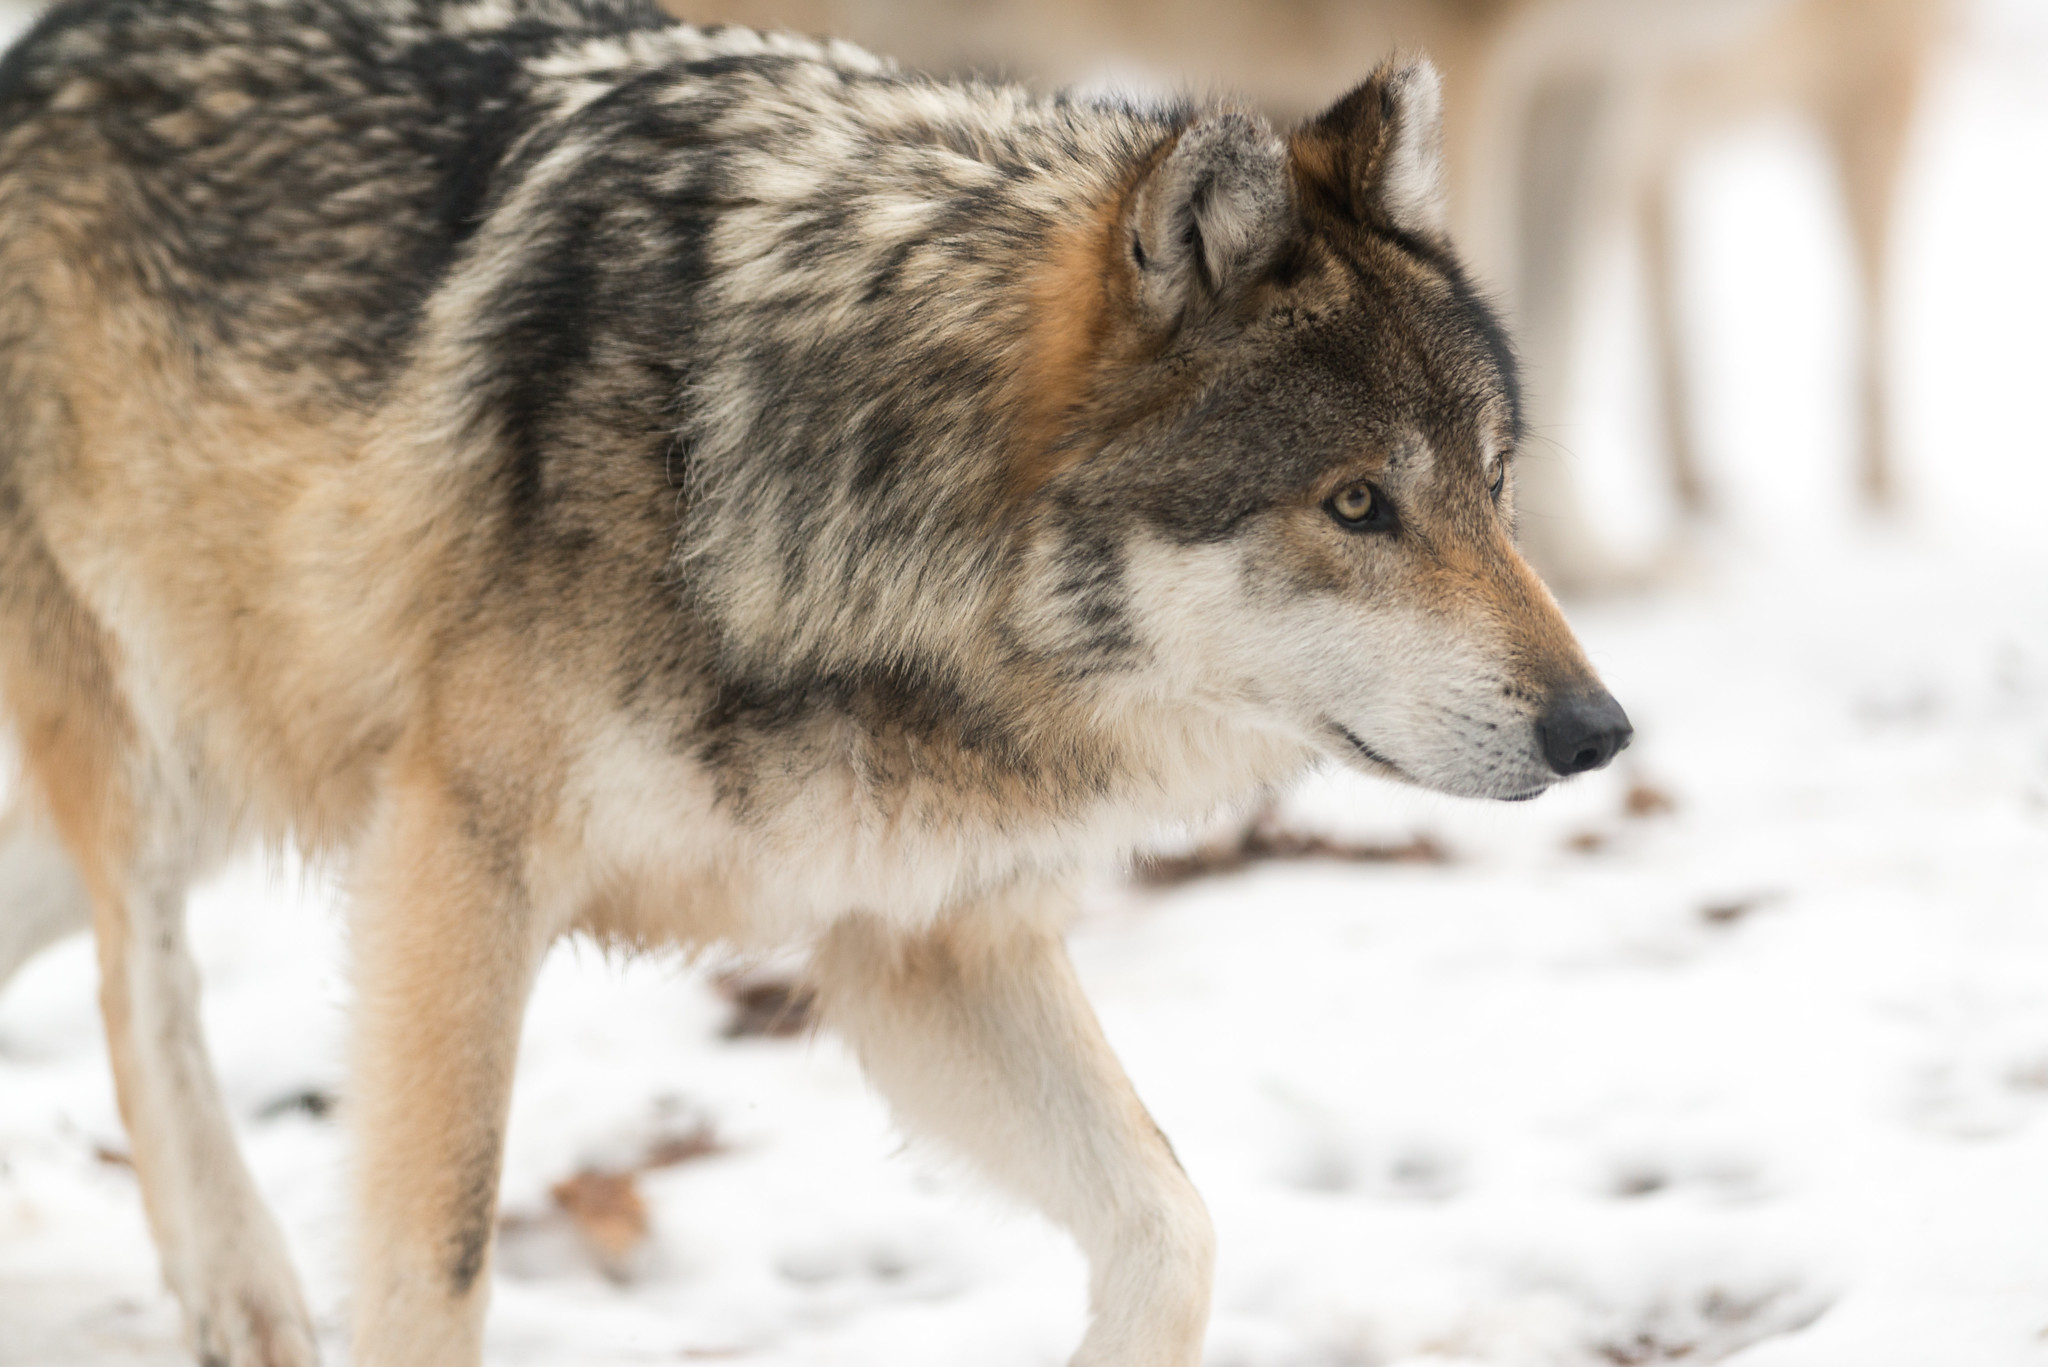 6 Wisconsin tribes voice opposition to bill seeking to remove federal protections for wolves